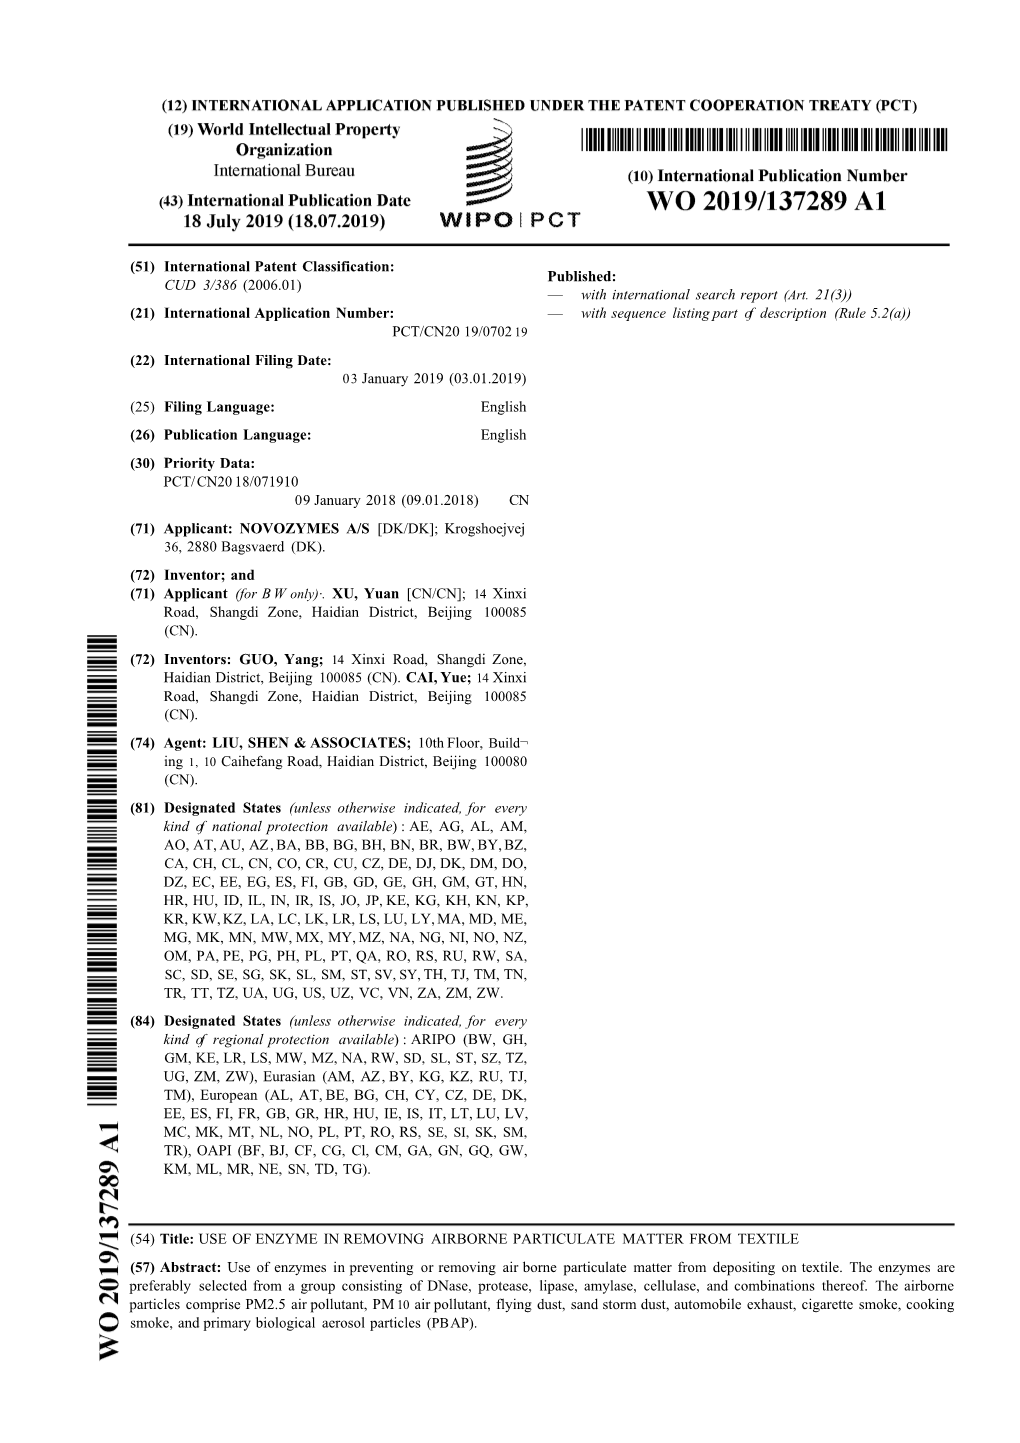 International Patent Classification: Published: CUD 3/386 (2006.01) — with International Search Report (Art